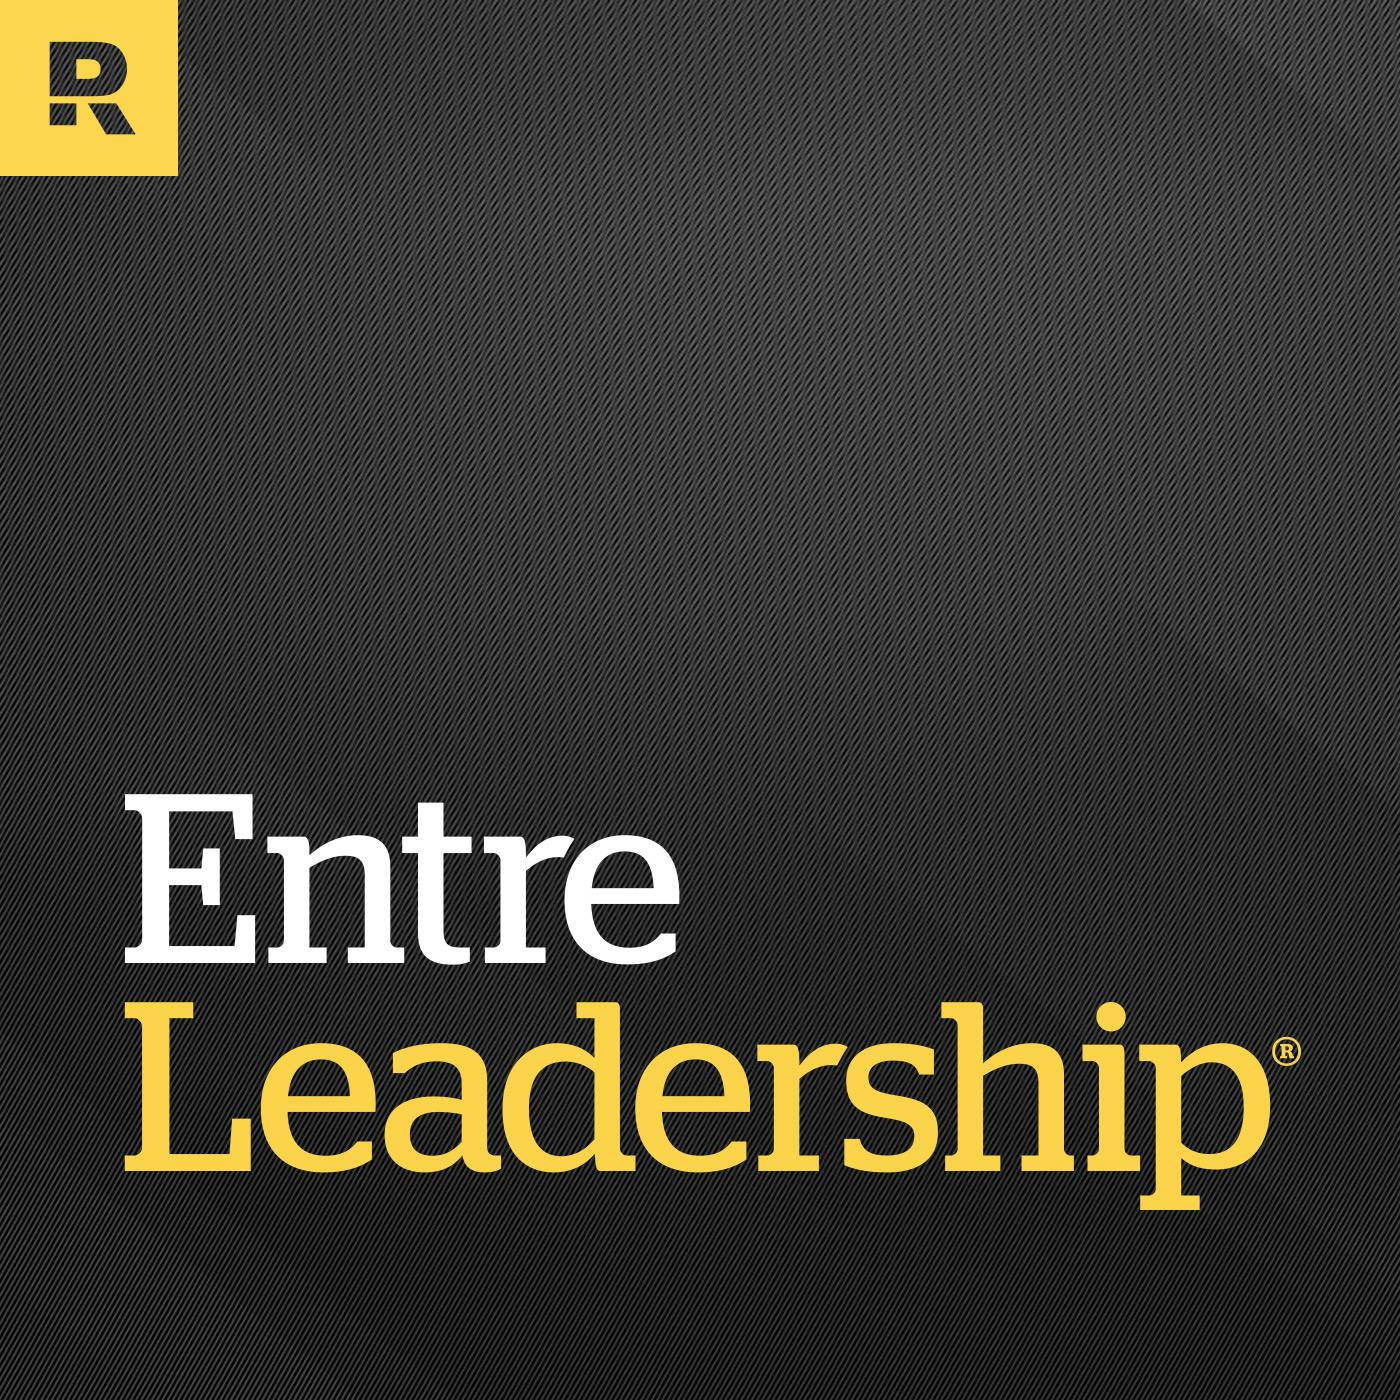 #239: Top 10 EntreLeadership Podcasts of 2017